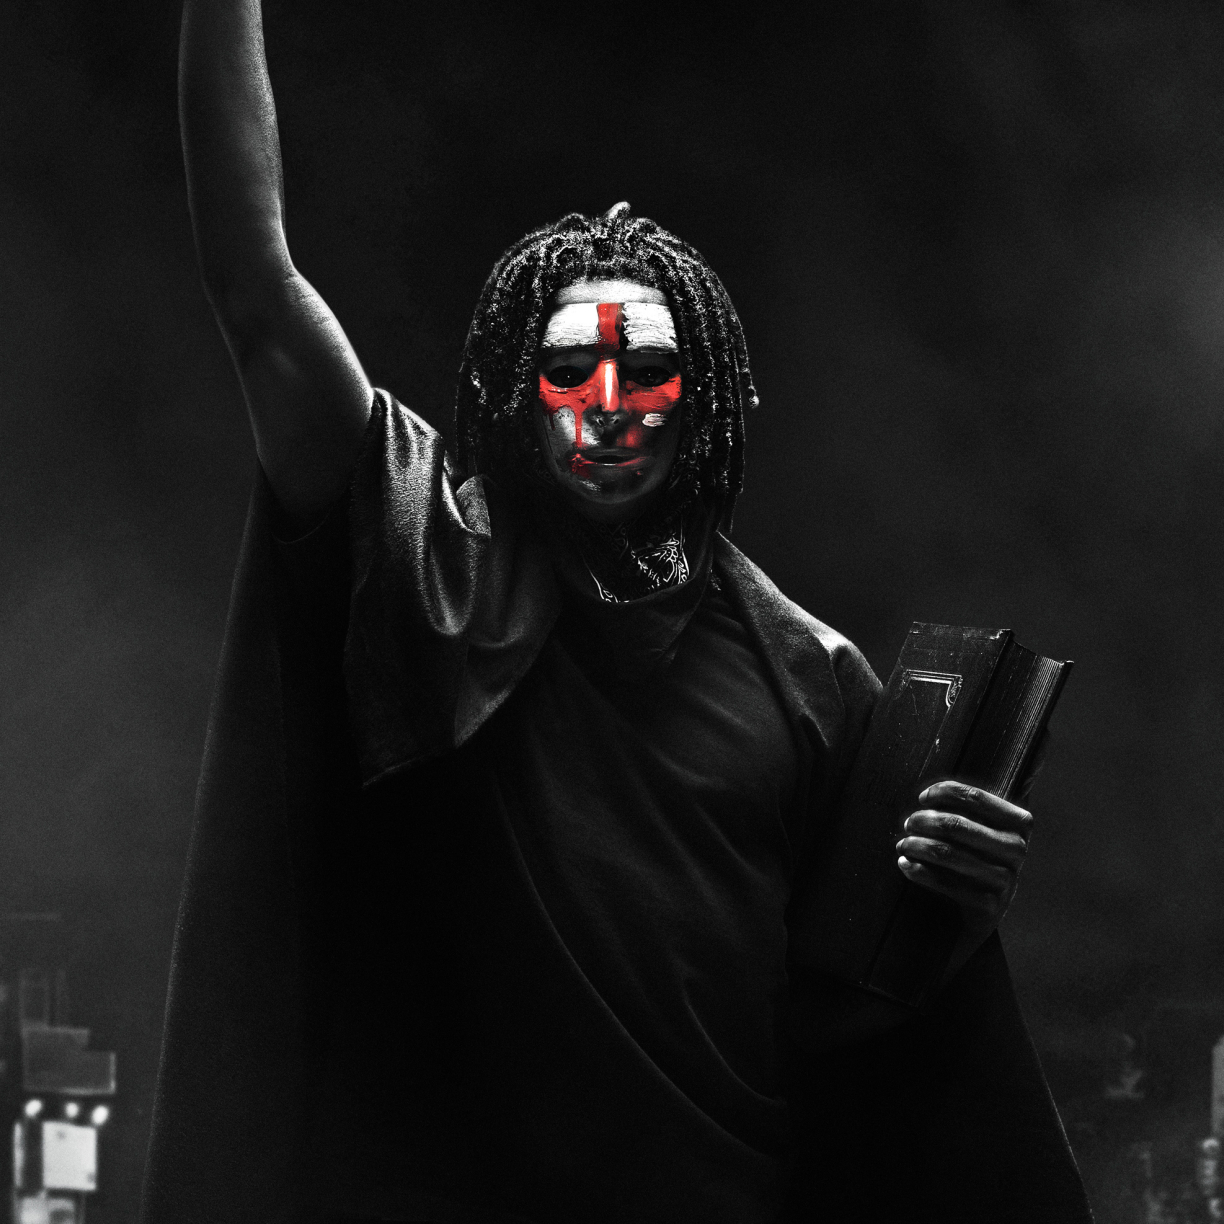 2018 The First Purge